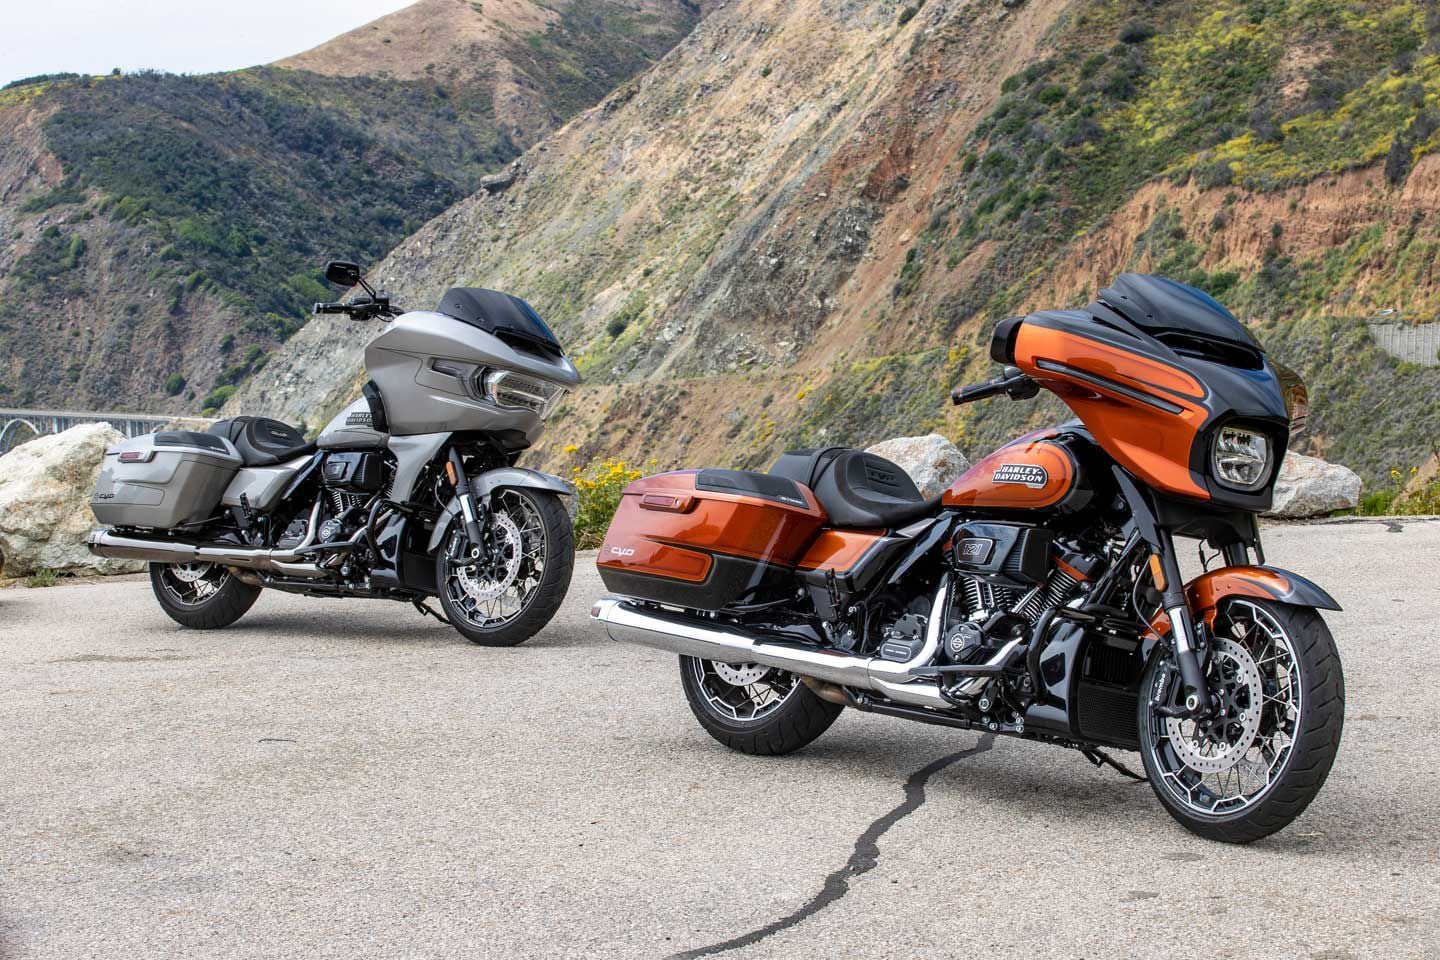 2023 Harley-Davidson CVO Street Glide and Road Glide 121 Review